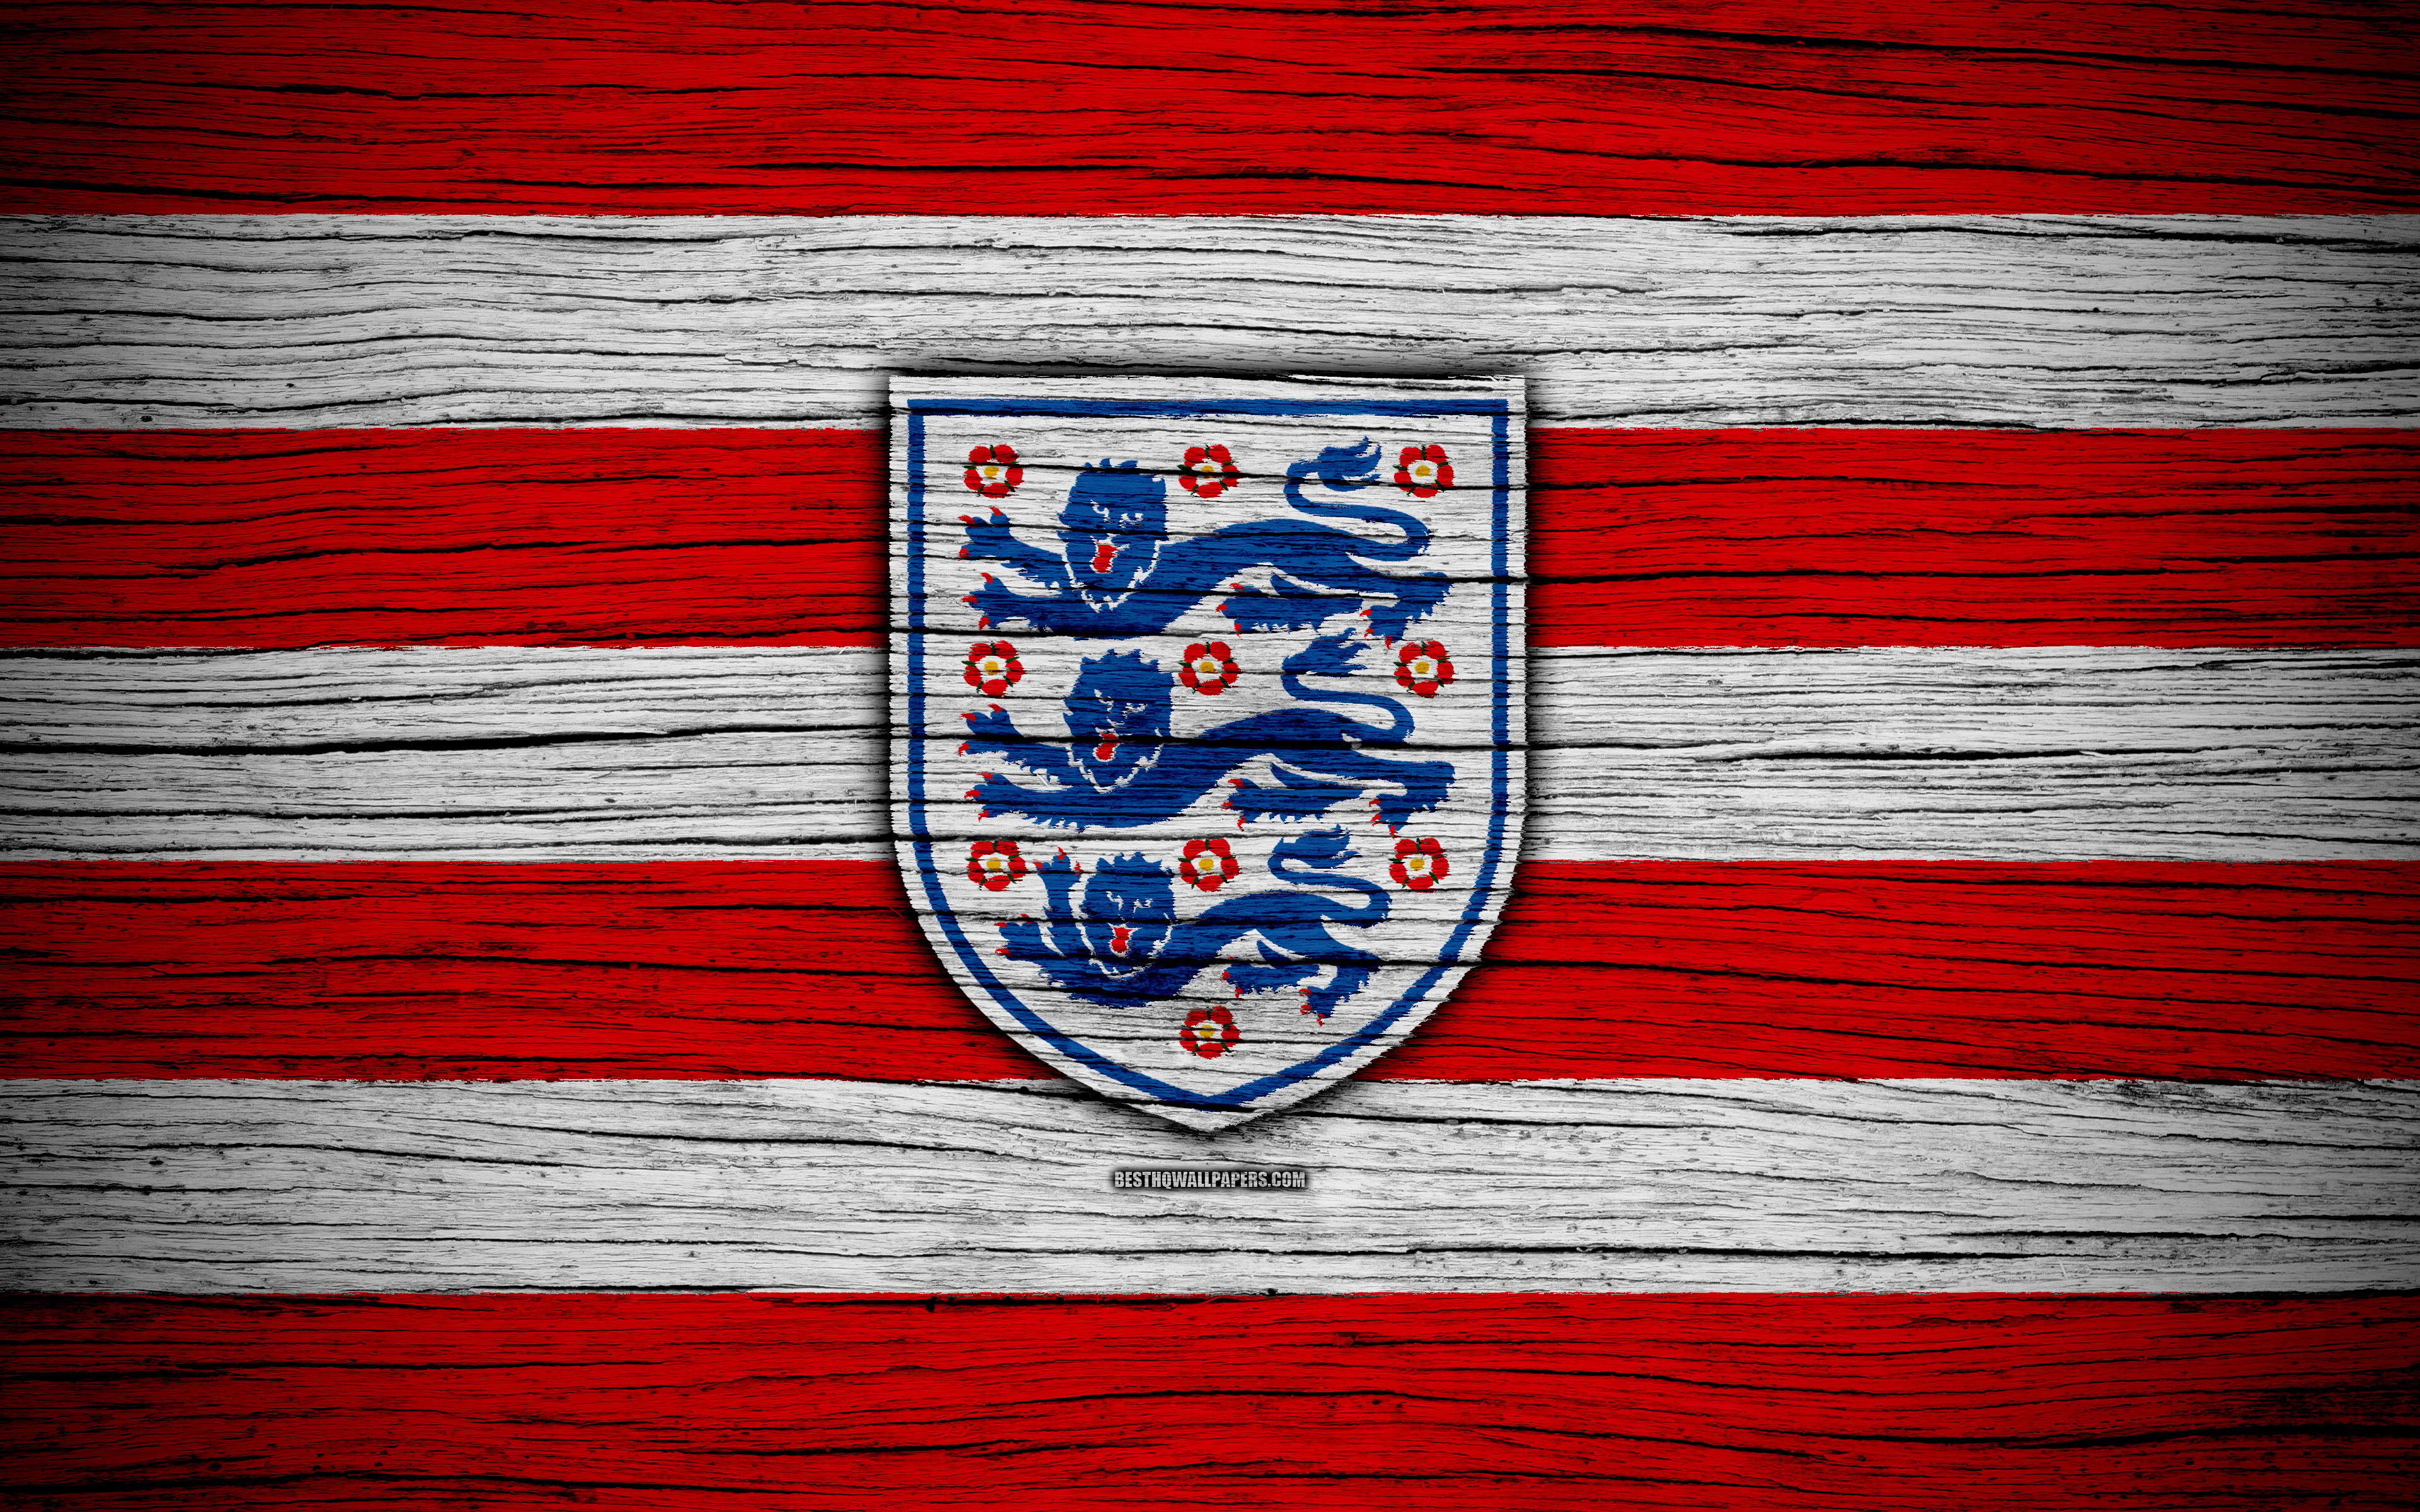 Download wallpaper 4k, England national football team, logo, Europe, football, wooden texture, soccer, England, European national football teams, English Football Federation for desktop with resolution 3840x2400. High Quality HD picture wallpaper